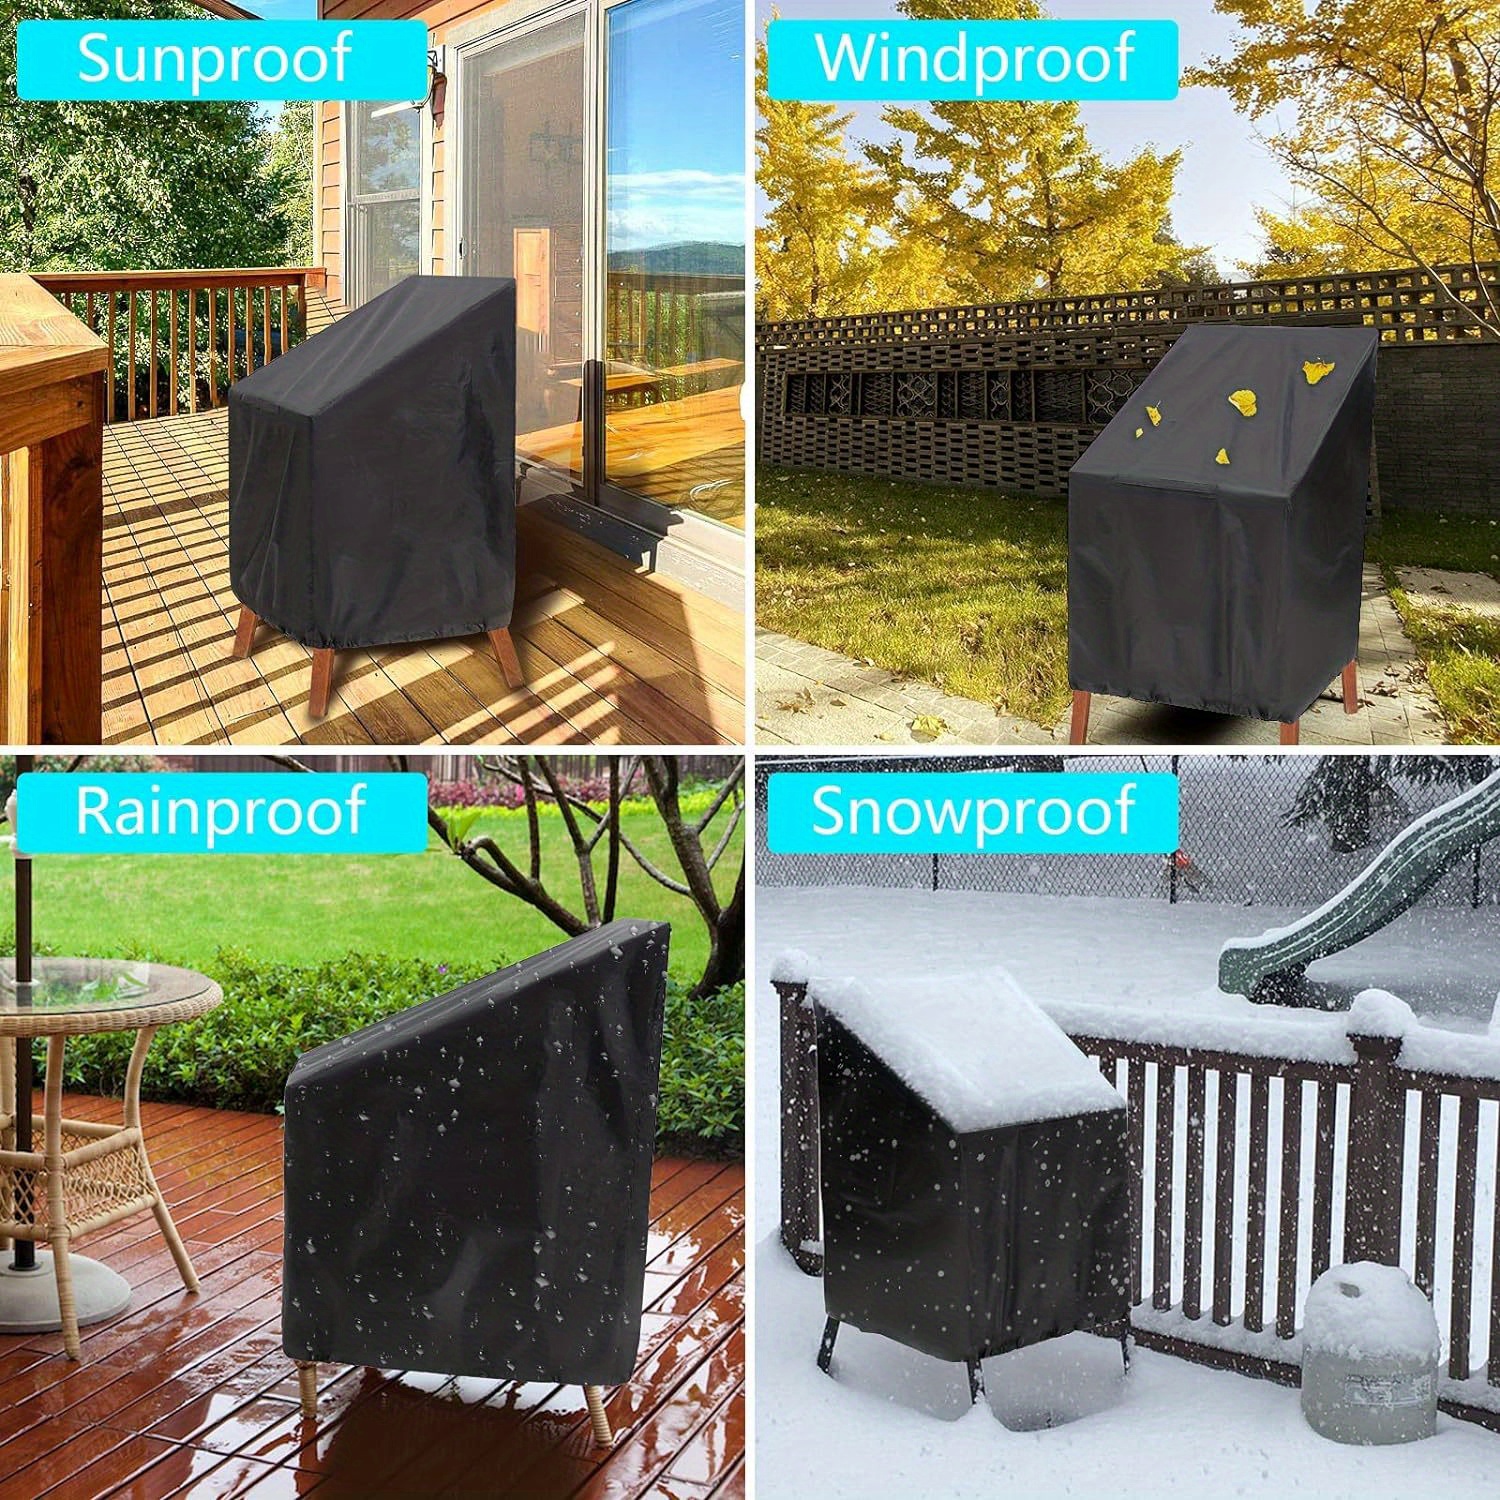 

uv-resistant" 1pc Waterproof Outdoor Furniture Cover - 210d Oxford Cloth, Black - Protects Against Dust & Sun Damage